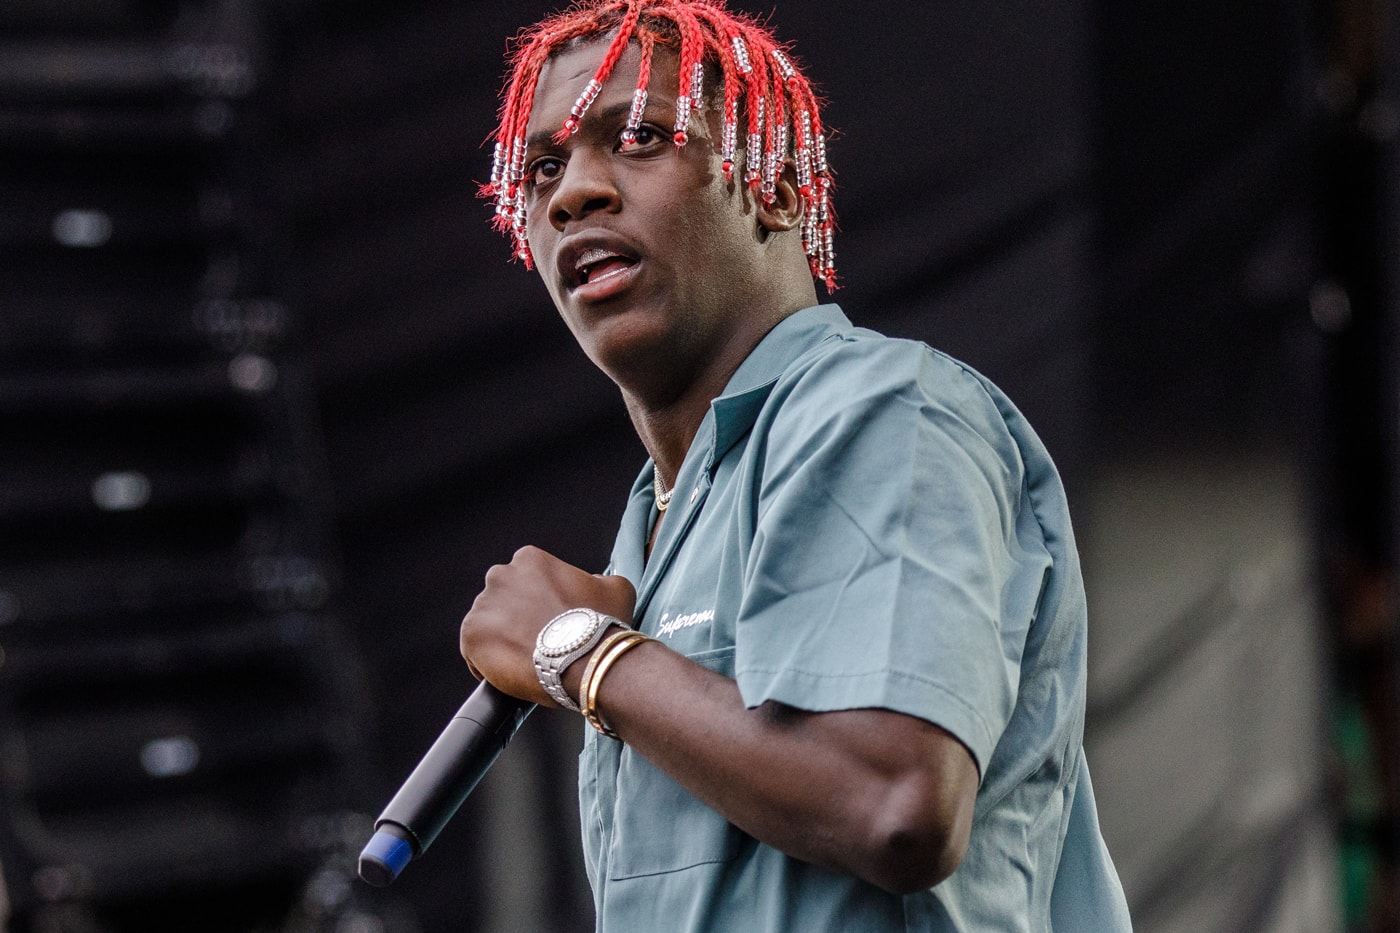 lil-yachty-rich-the-kid-lil-boat-and-the-goat-mixtape-we-got-it